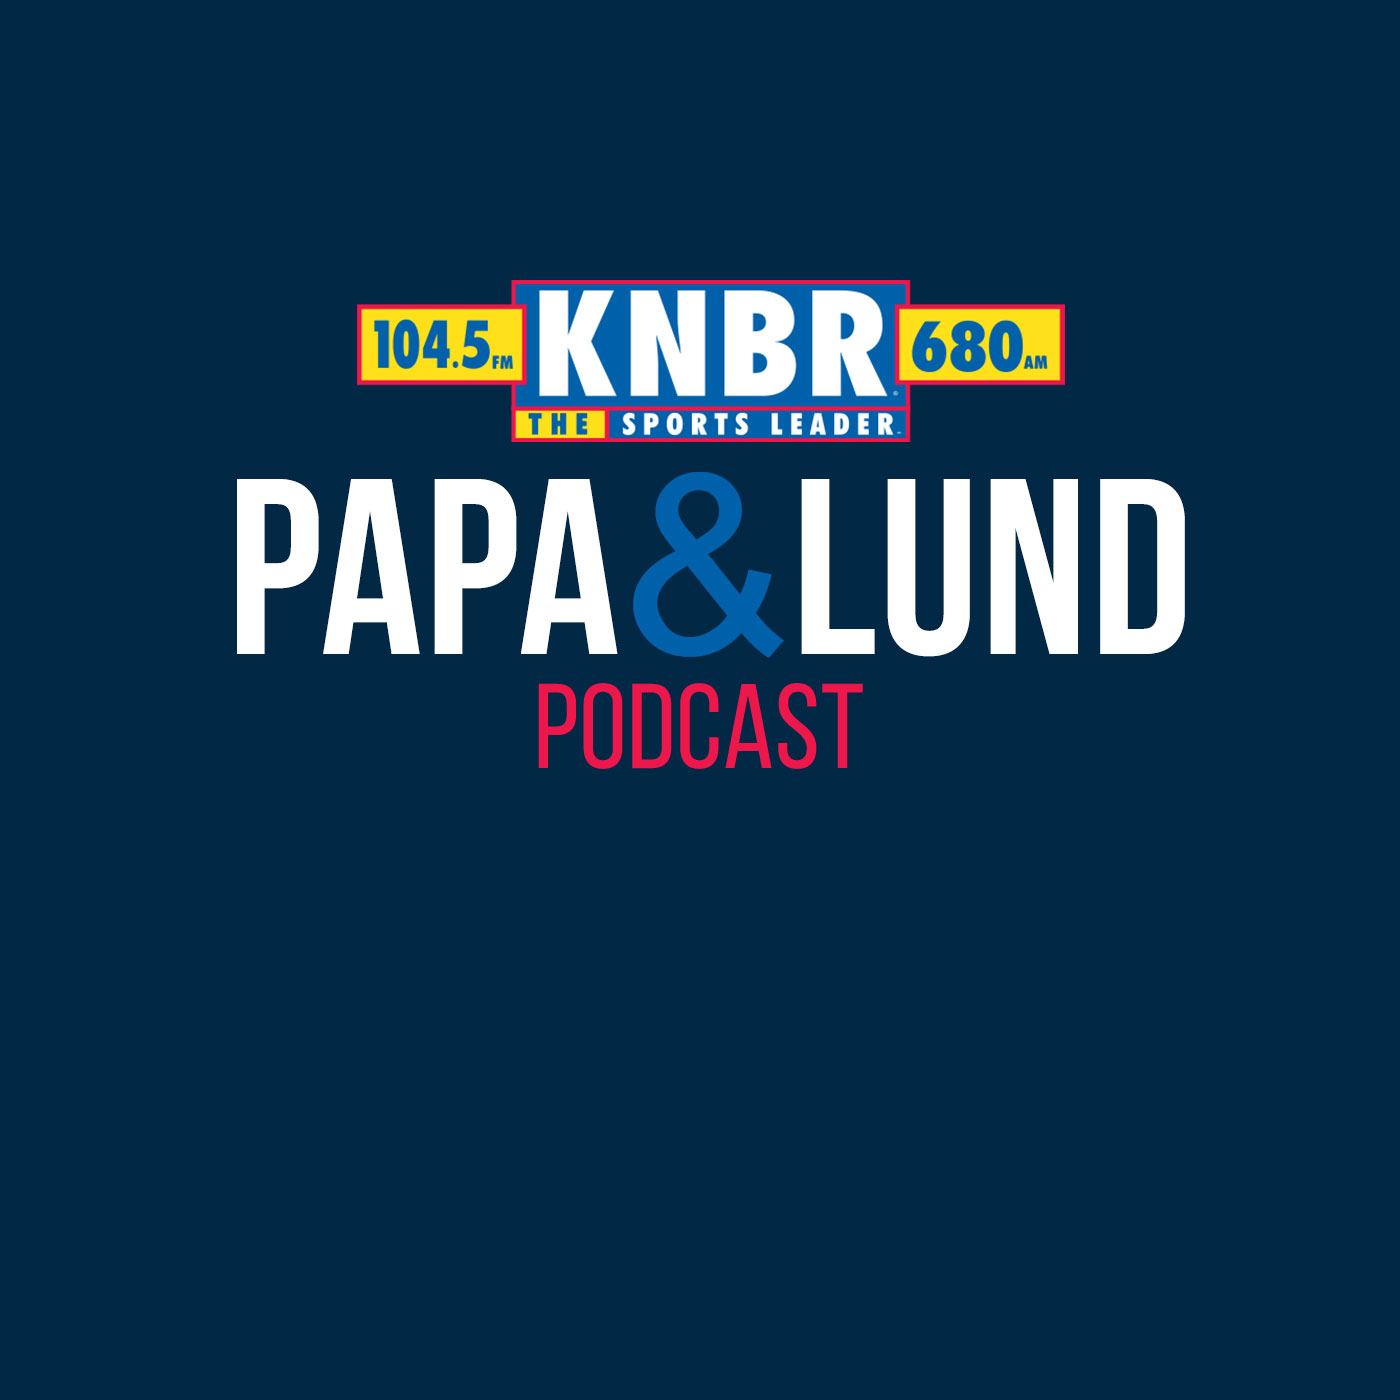 10-25 David Lombardi joins Papa & Lund to break down what went wrong in the 49ers defense worst showing this season as they prepare for a huge game against the Rams